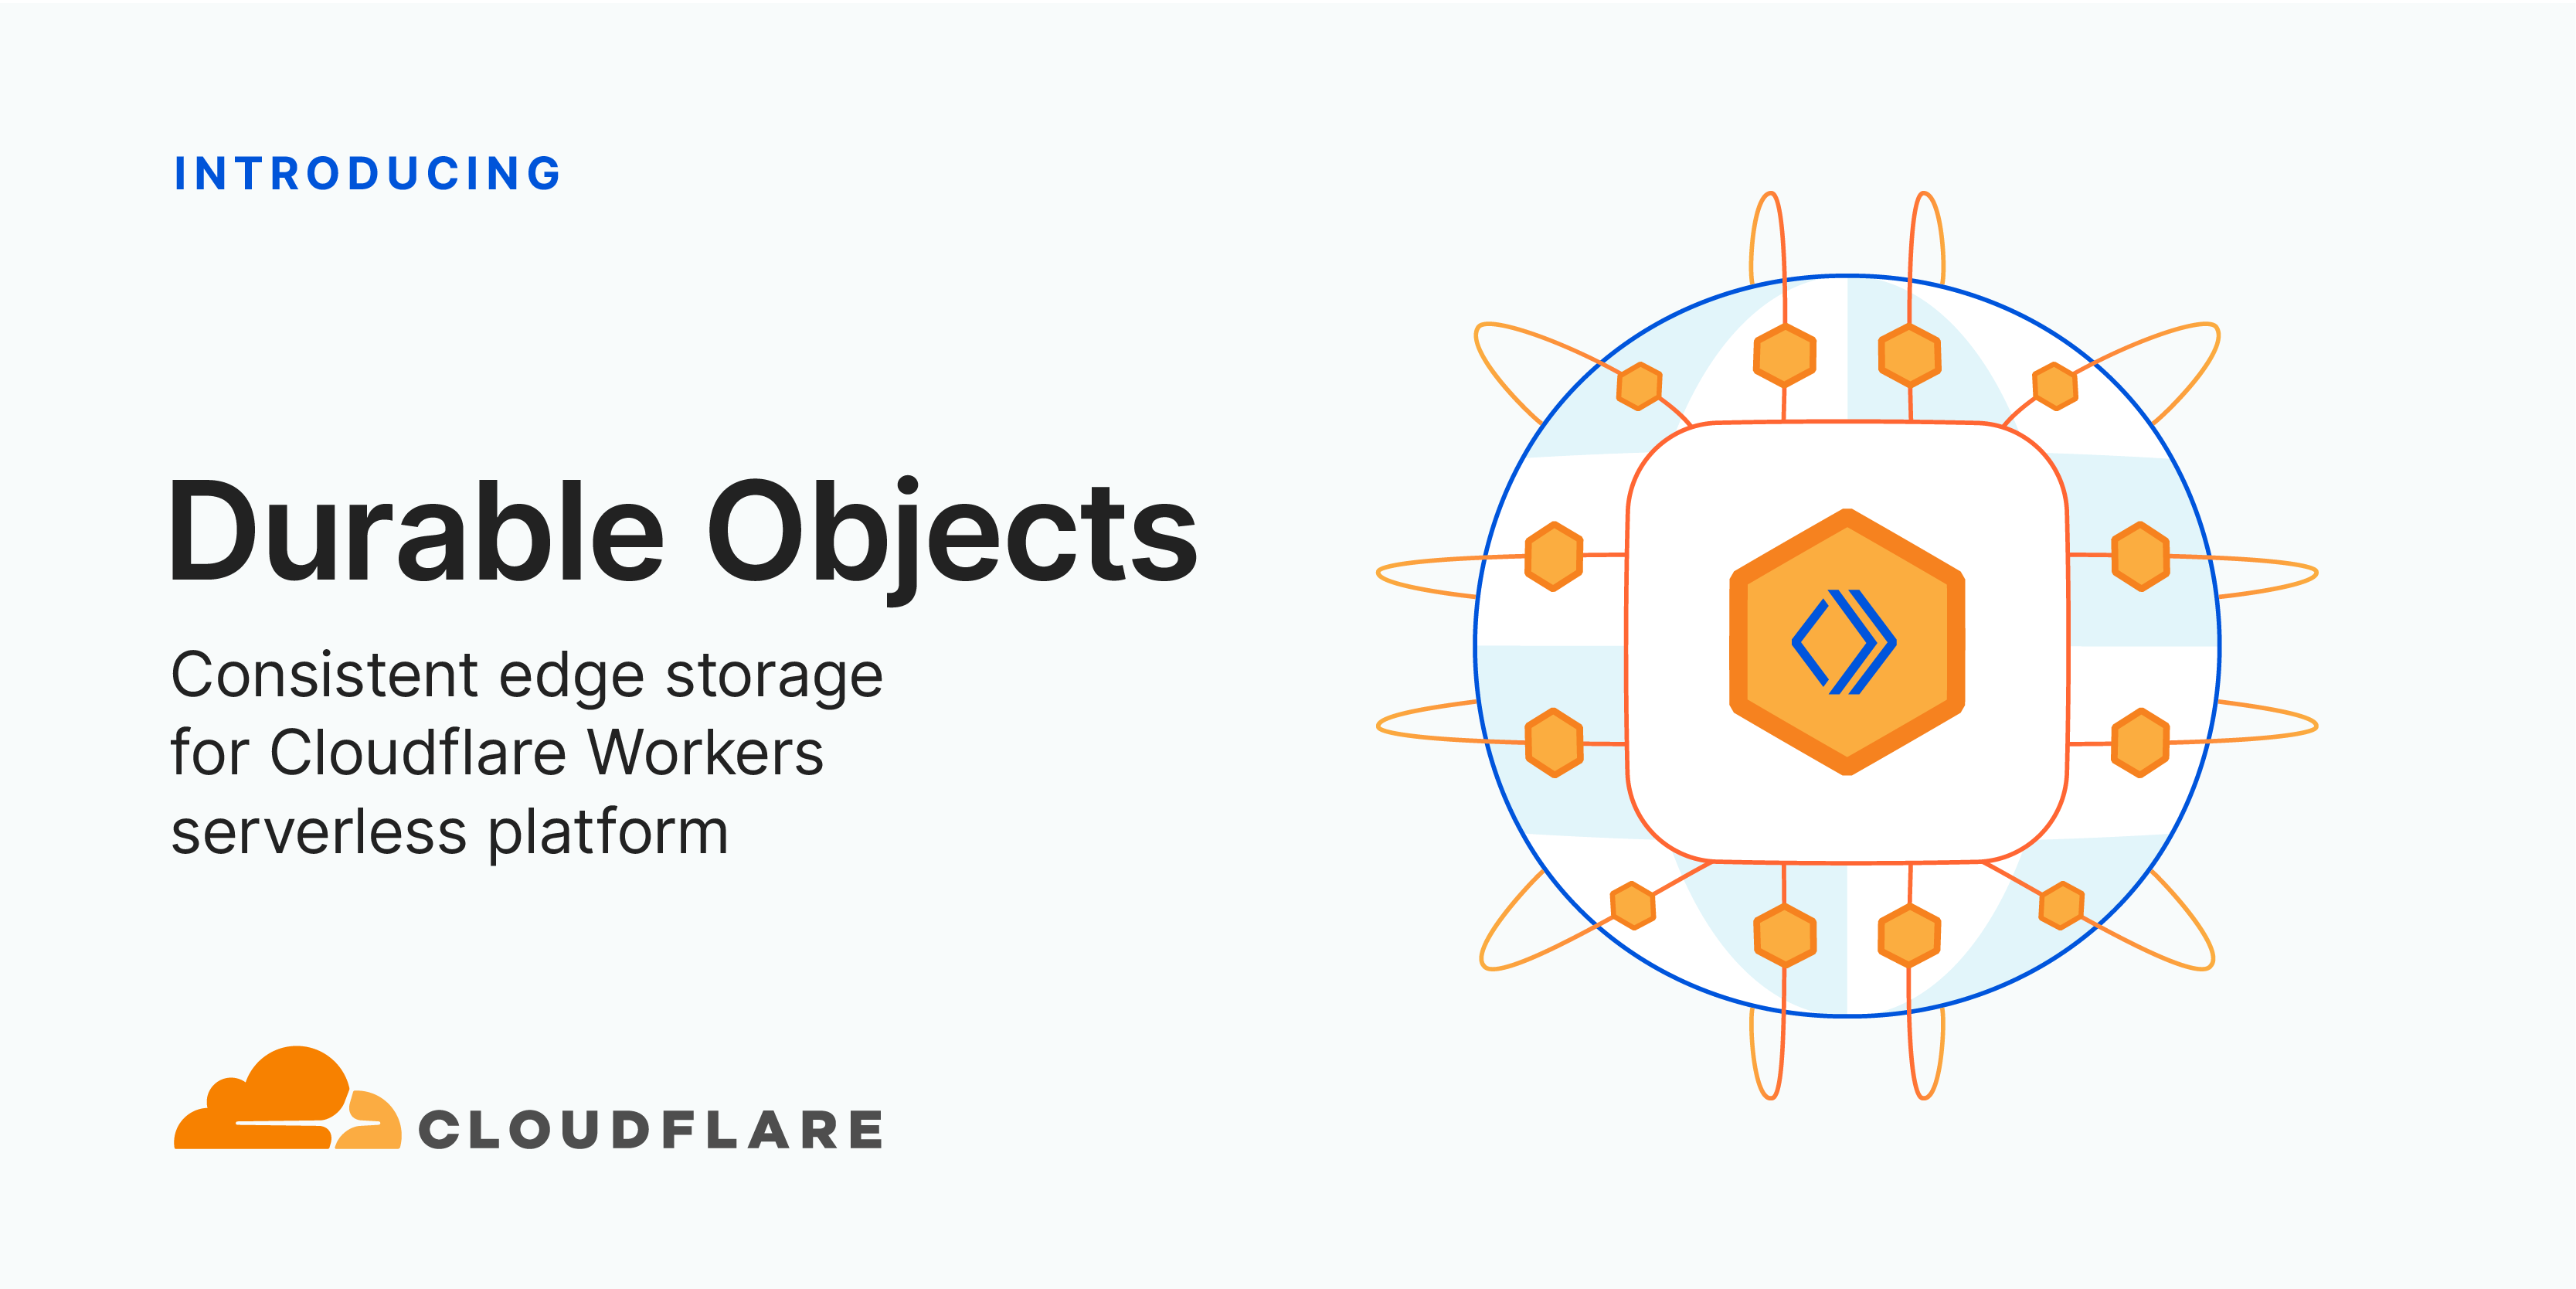 Workers Durable Objects Beta:
A New Approach to Stateful Serverless